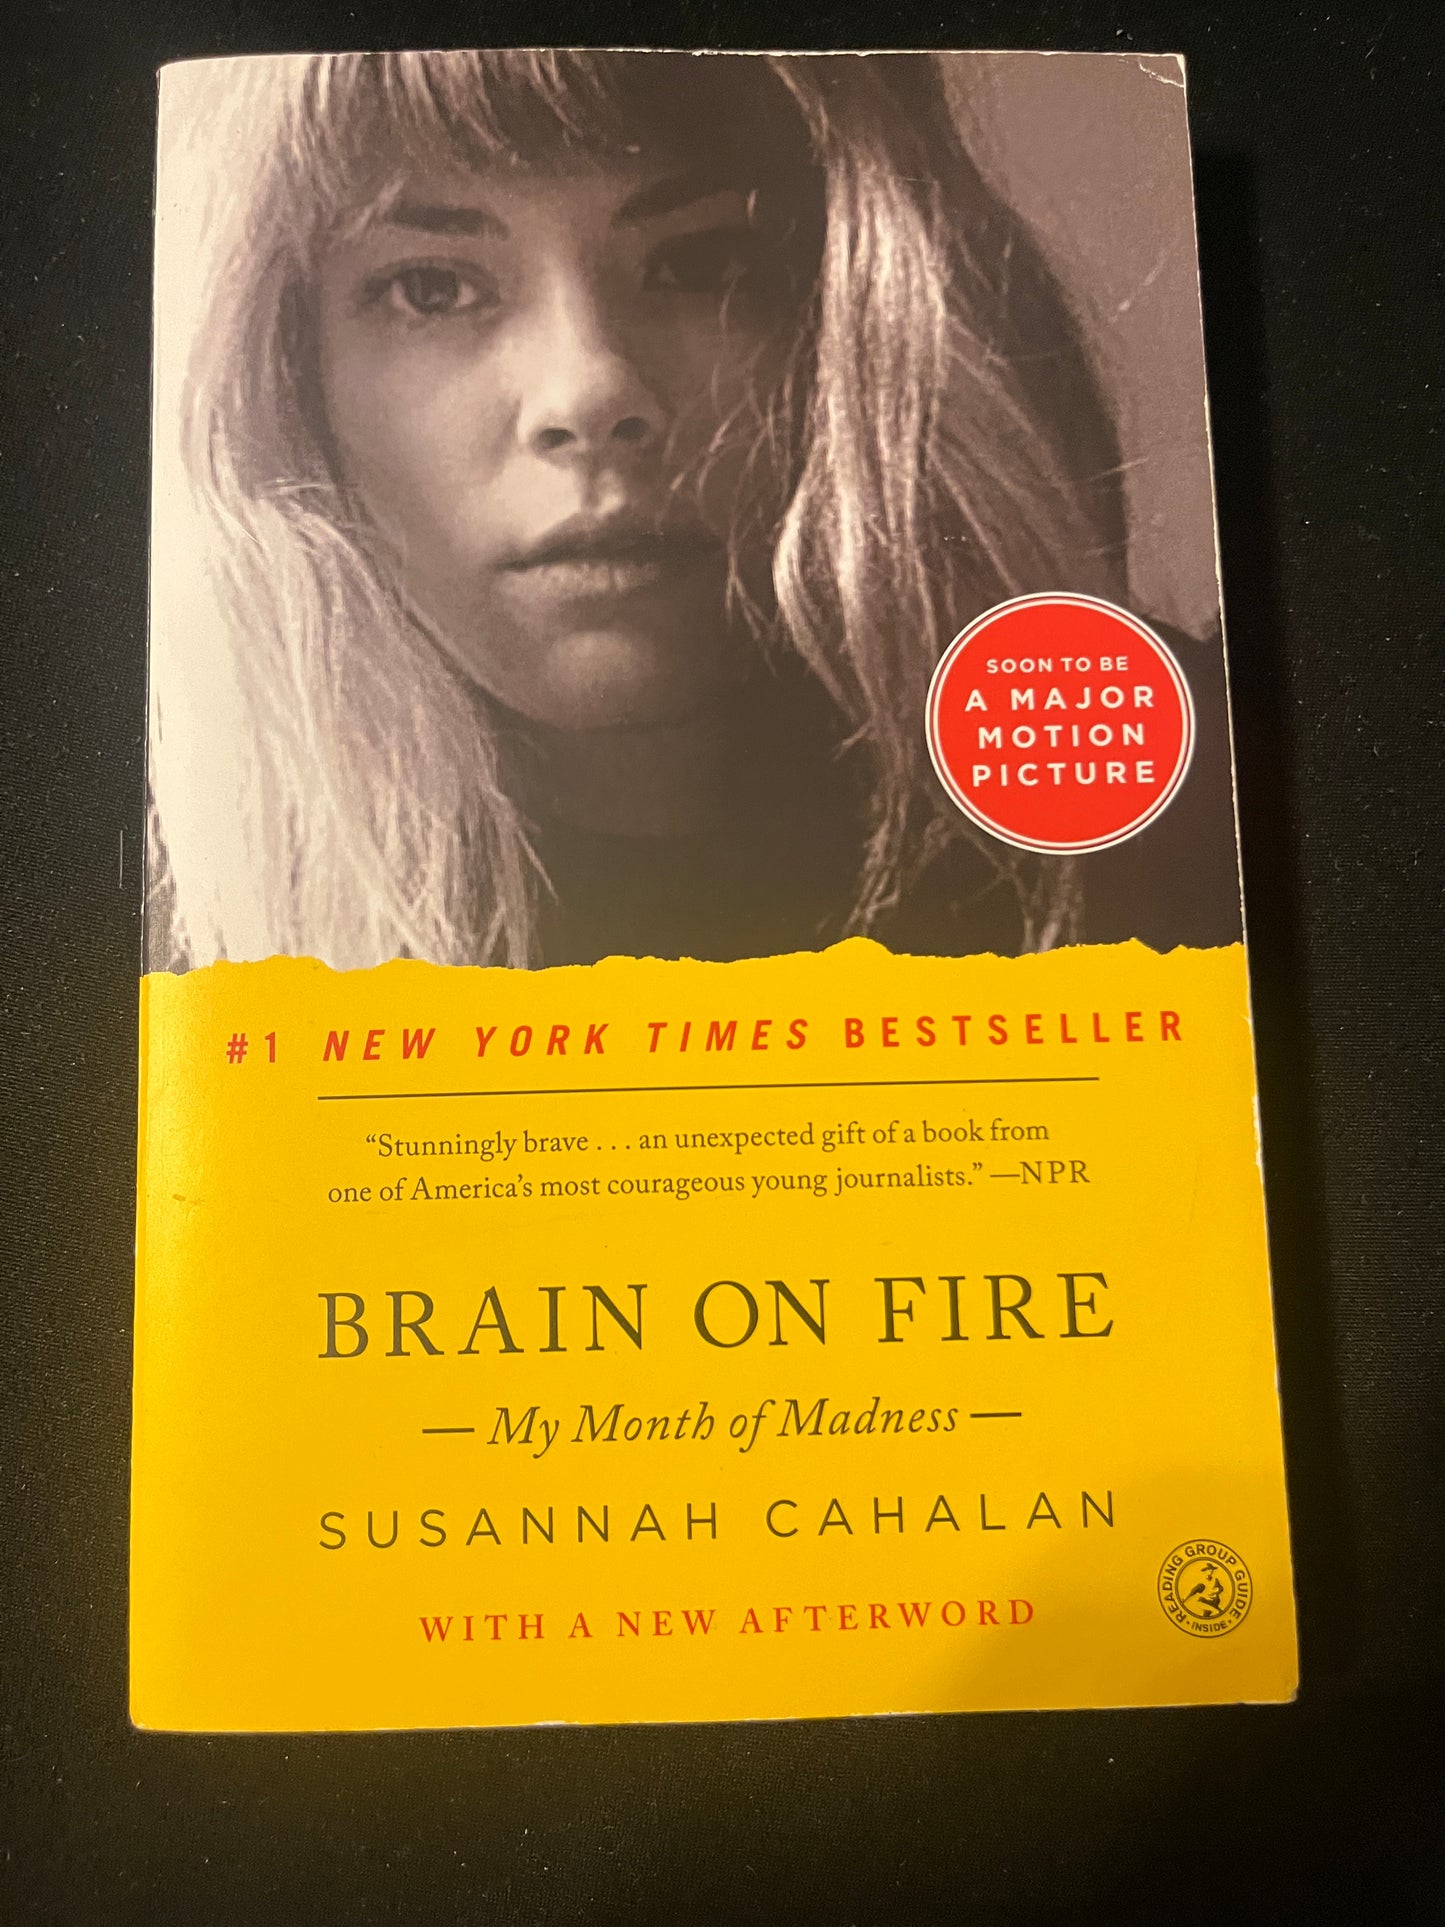 BRAIN ON FIRE: MY MONTH OF MADNESS by Susannah Cahalan